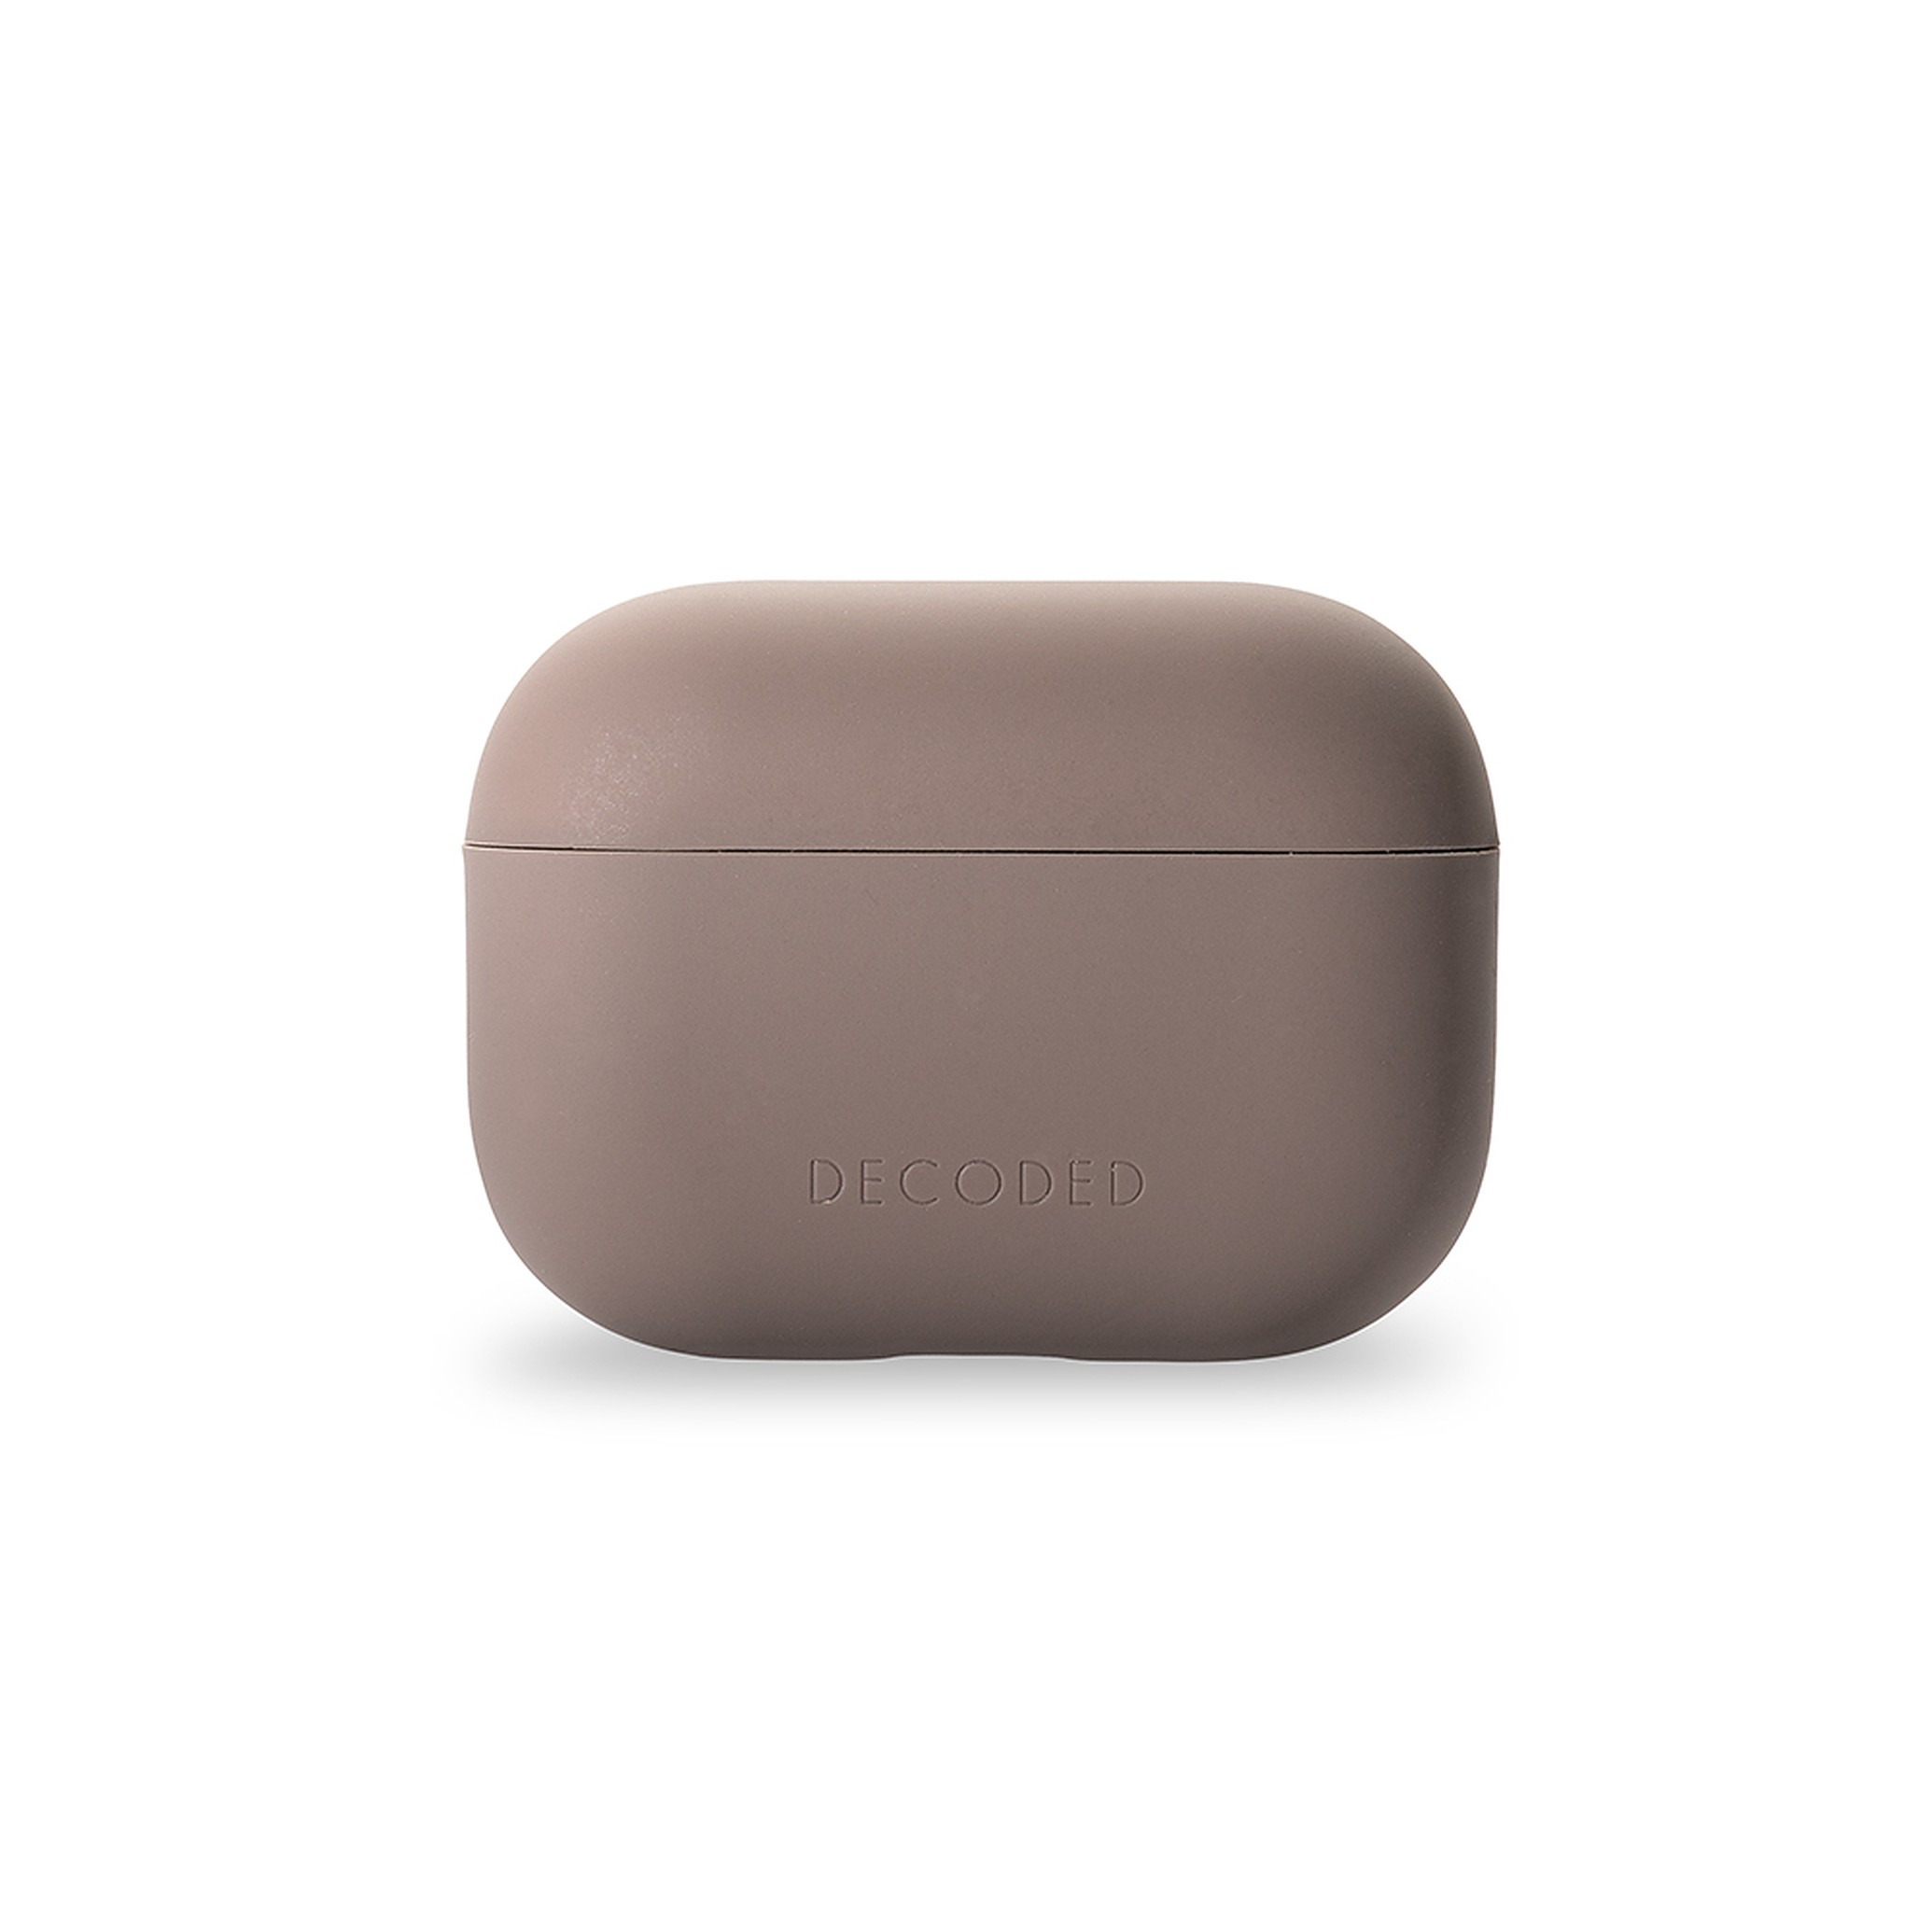 DECODED Aircase, Full Airpods Cover, Apple, Dark taupe 3